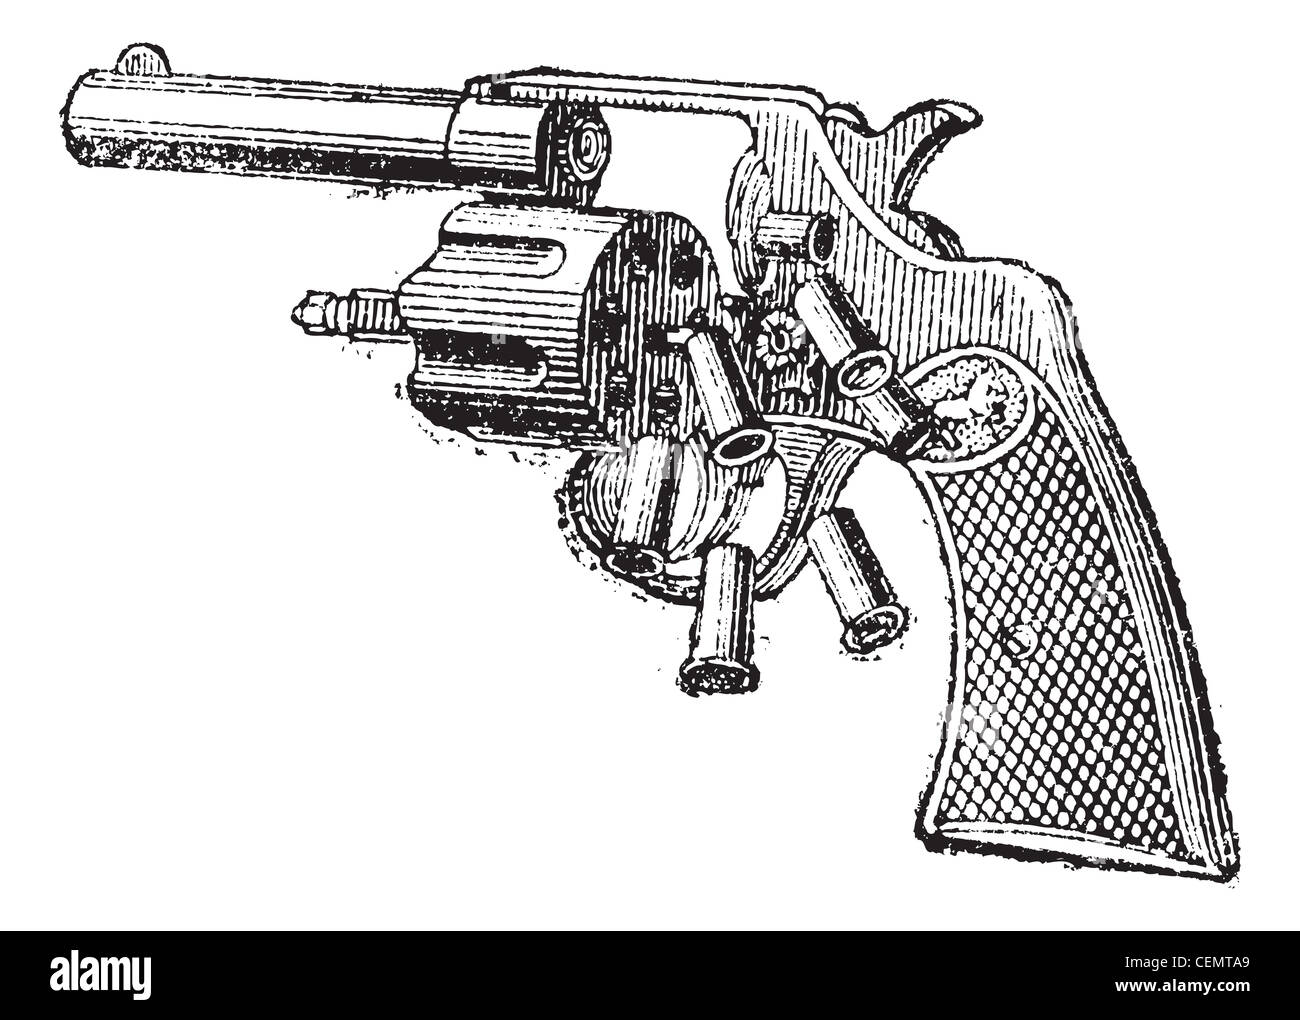 Colt Revolver, vintage engraved illustration. Dictionary of words and things - Larive and Fleury - 1895. Stock Photo